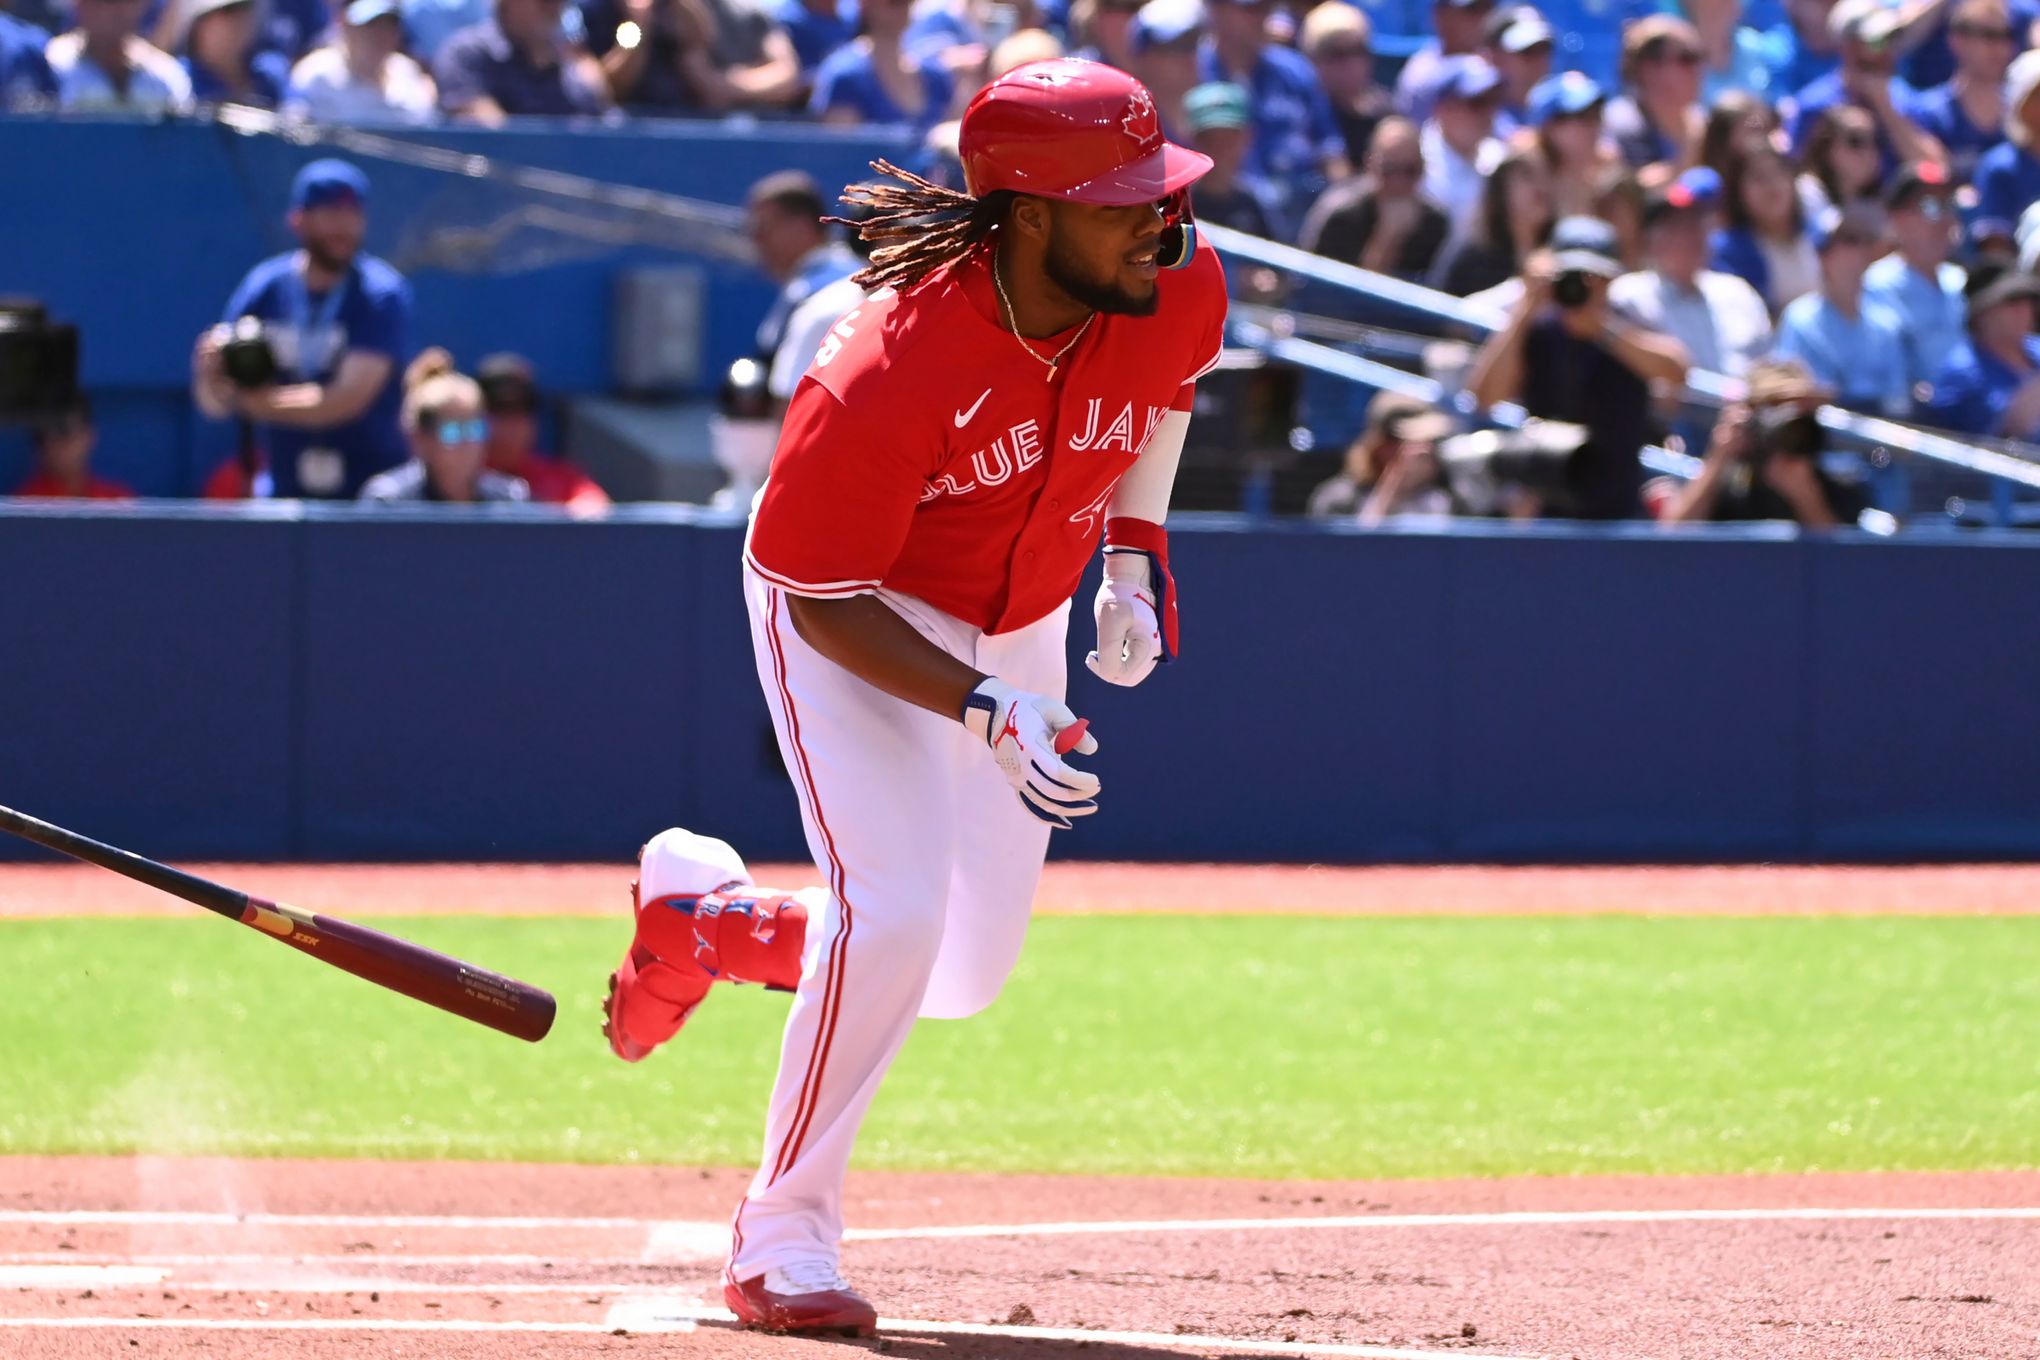 Vladimir Guerrero Jr. hits double with one-handed swing